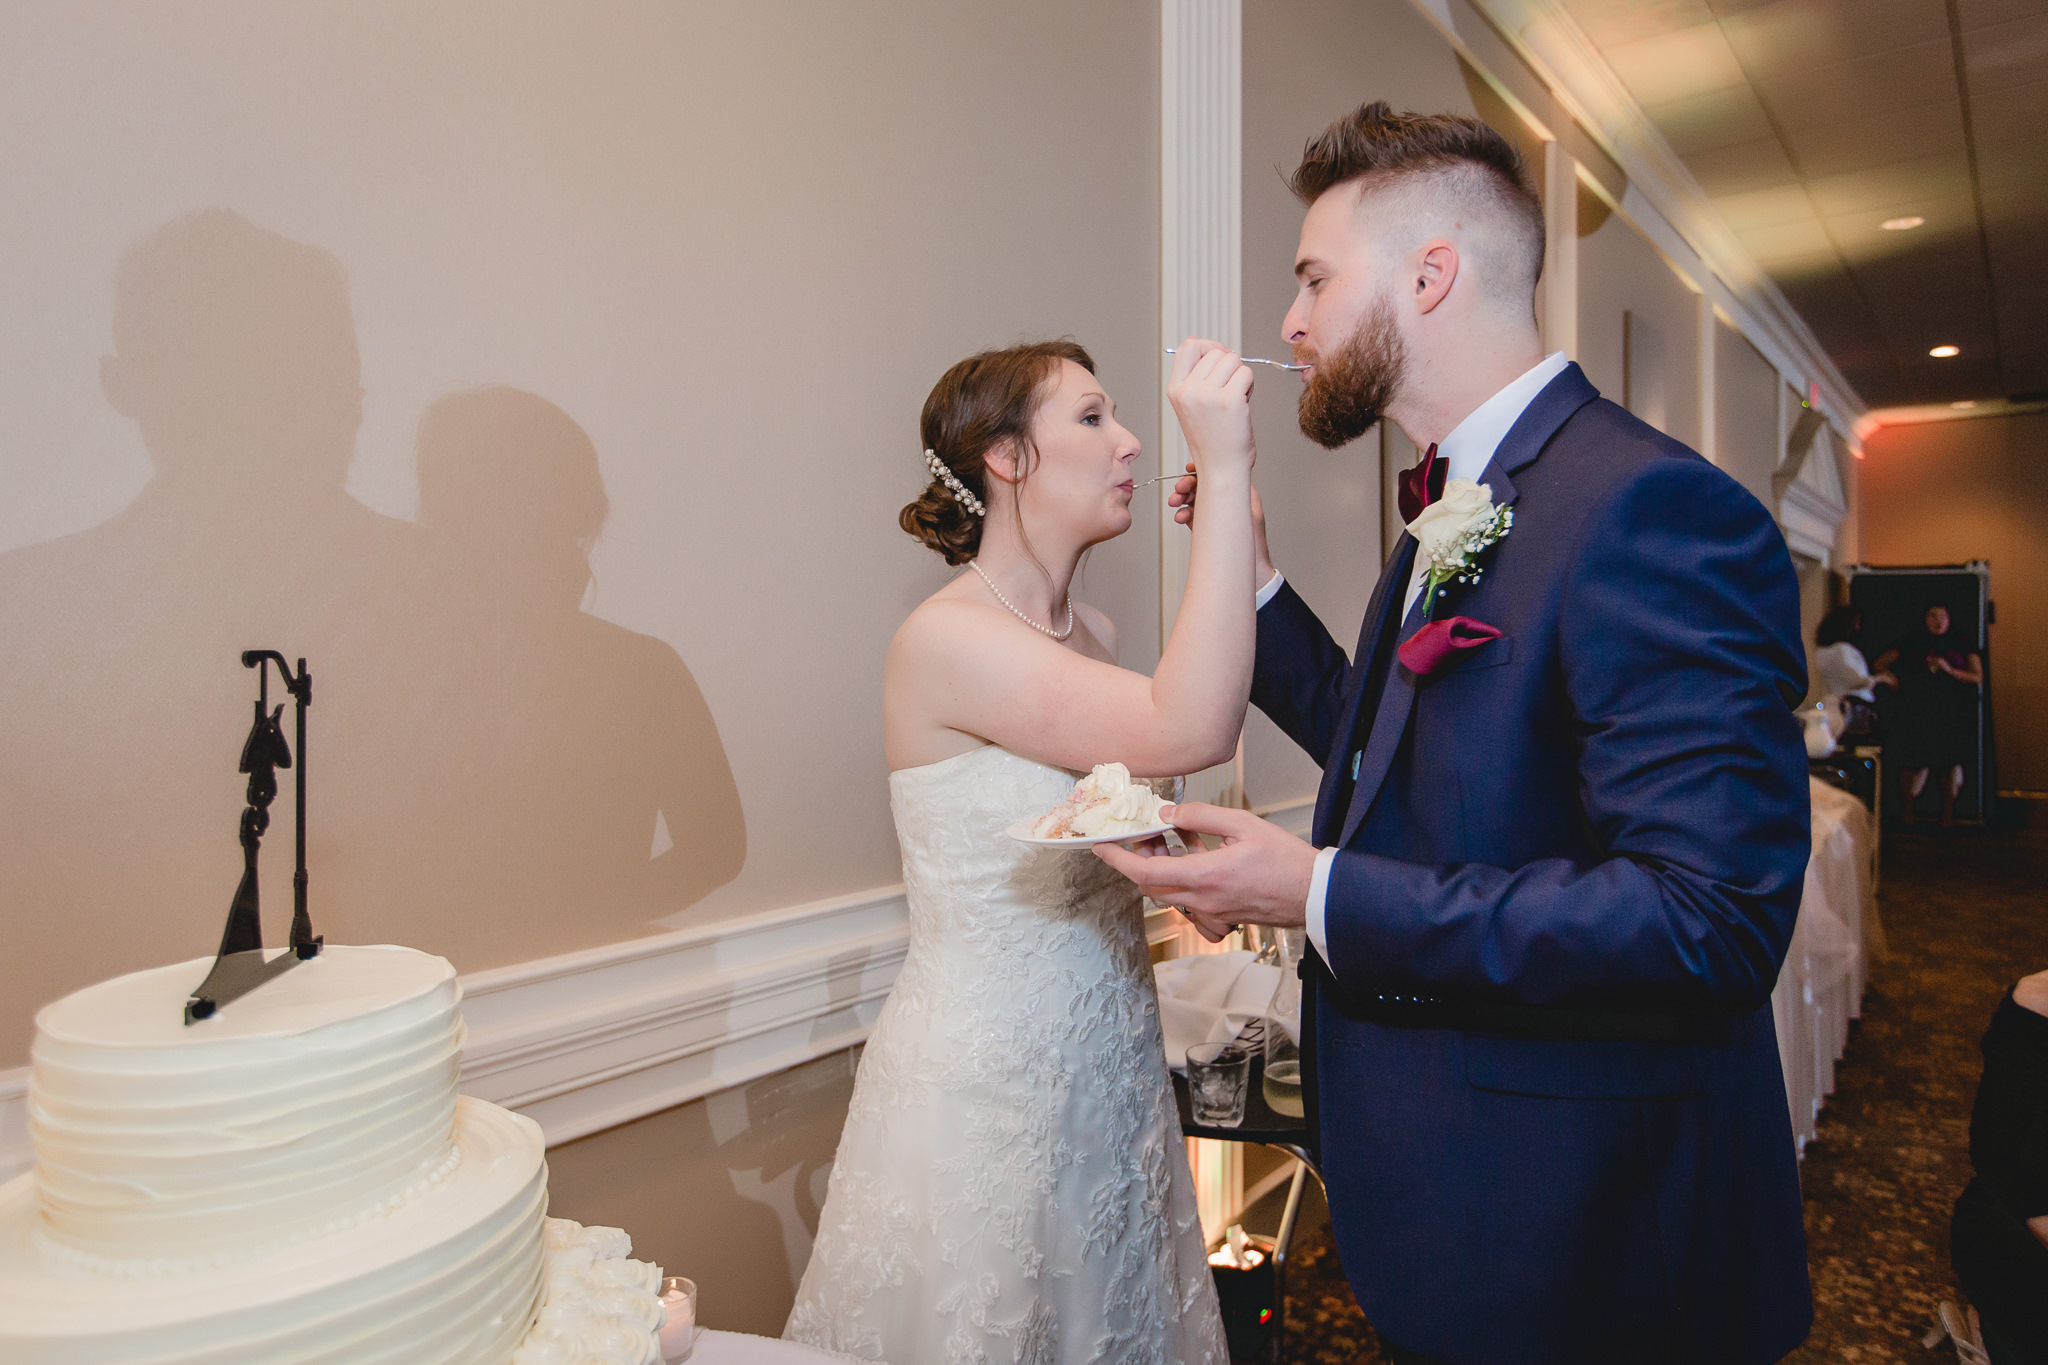 Bride and groom feed each other cake at their Chadwick wedding reception